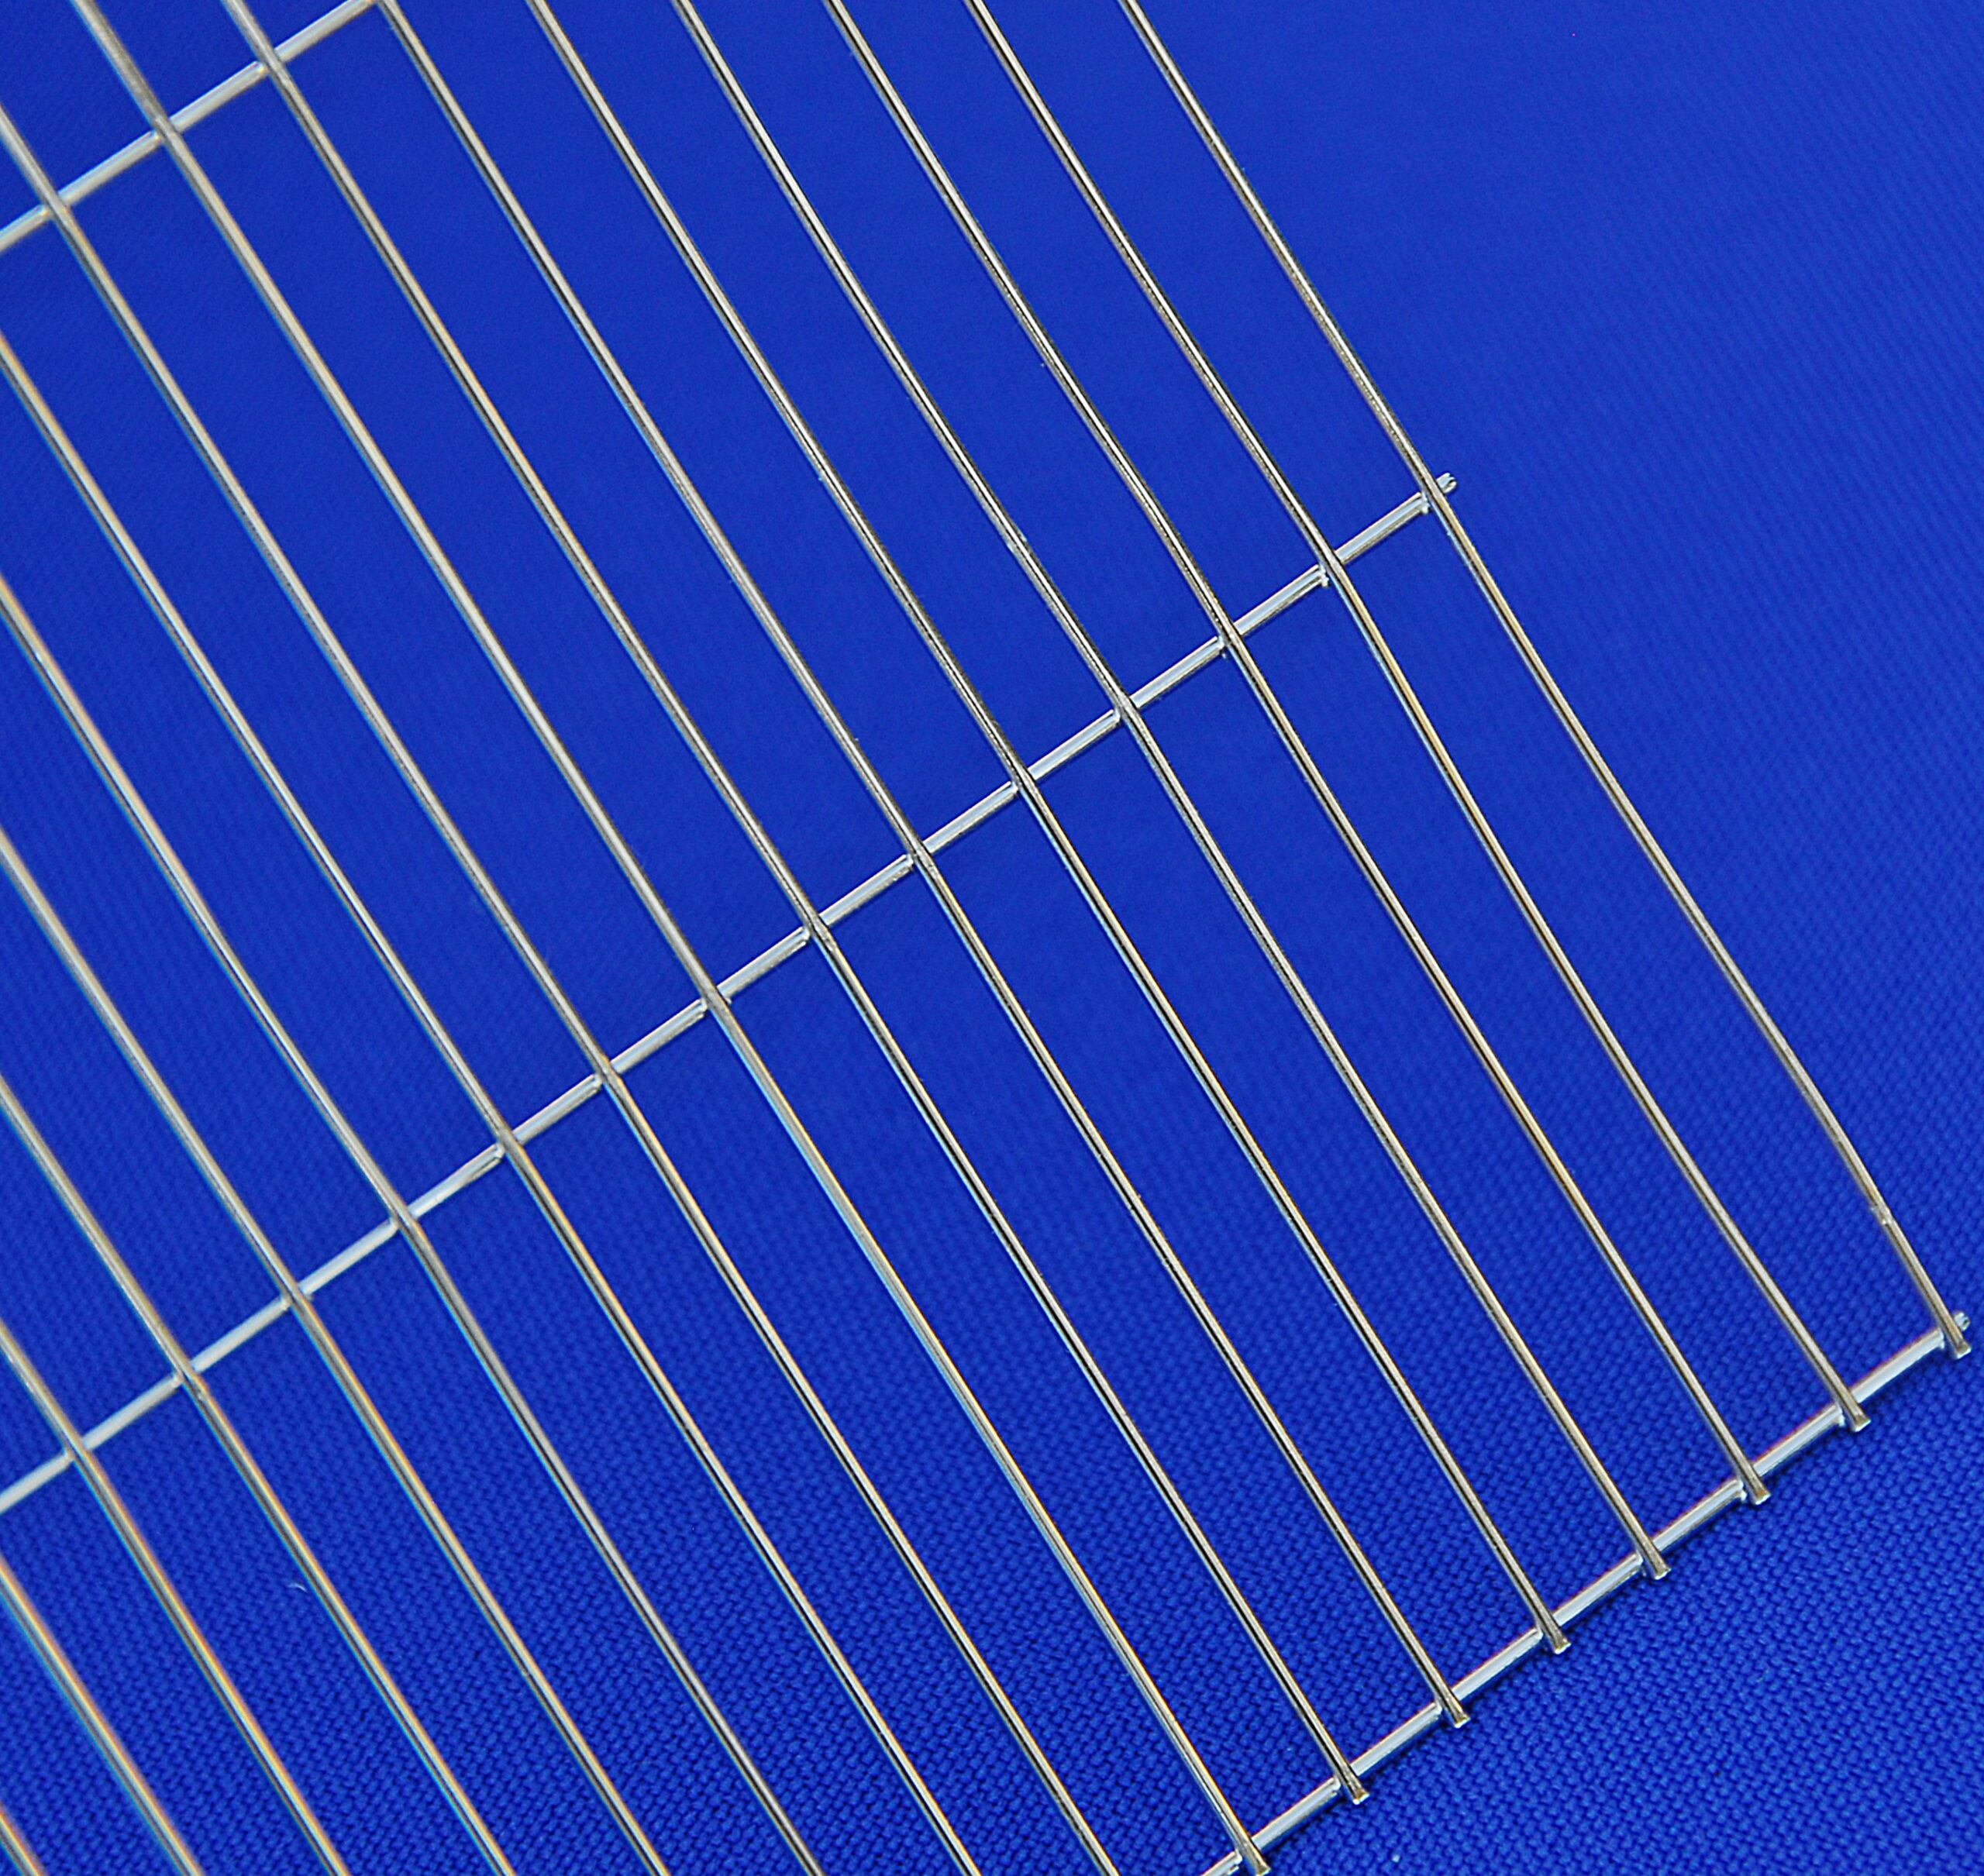 Welded wire mesh - with large elongated mesh opening